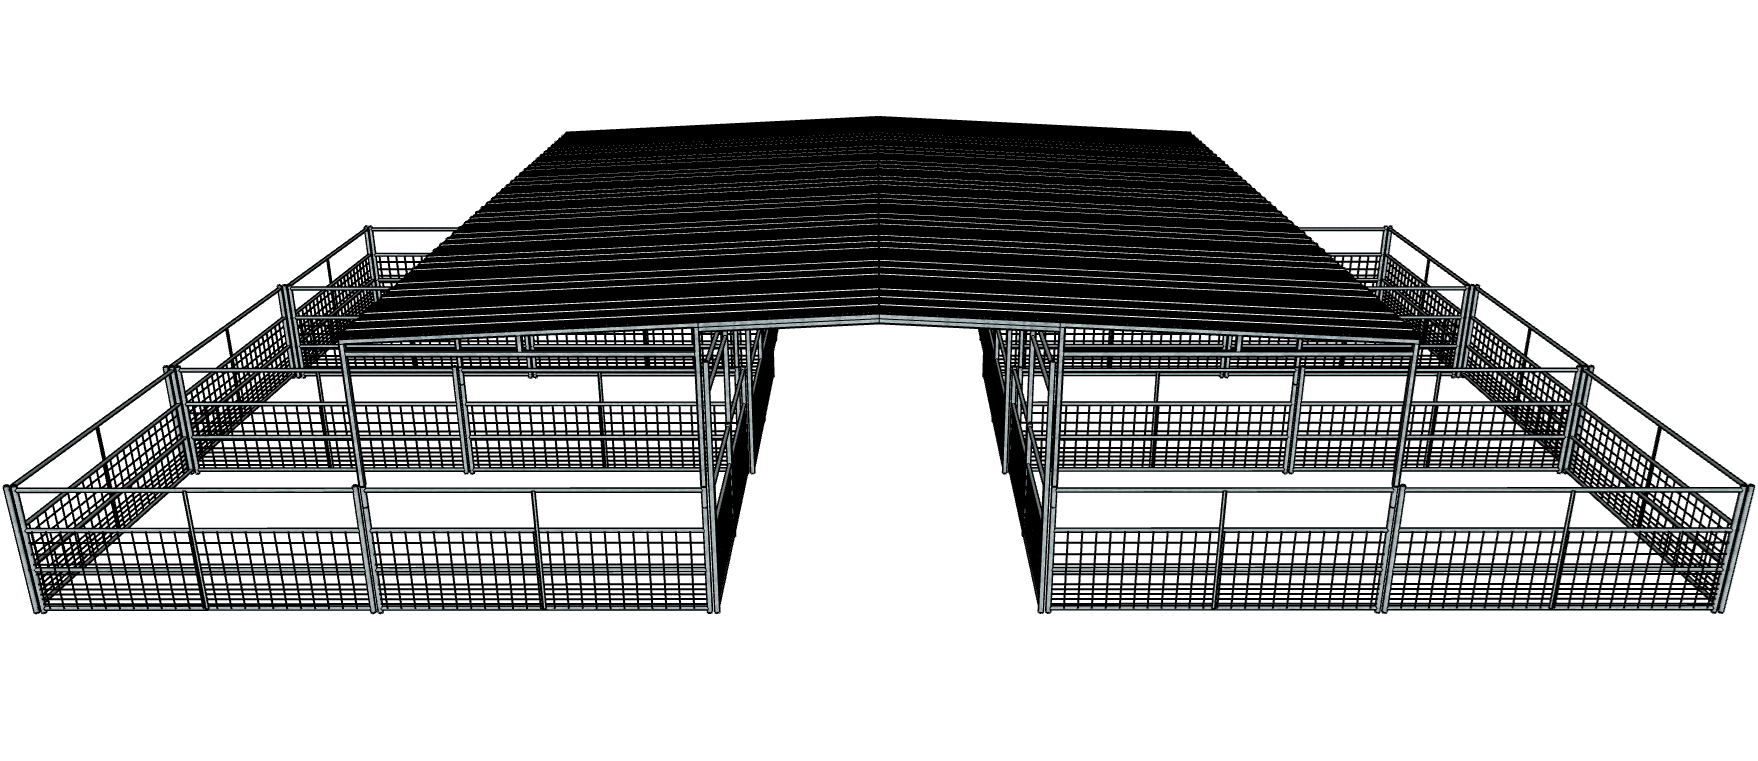 Galvanized 50 Ft X 30 Ft 4-Rail with Mesh 6 Stall Barn Kit with 30 Ft Gable Roof